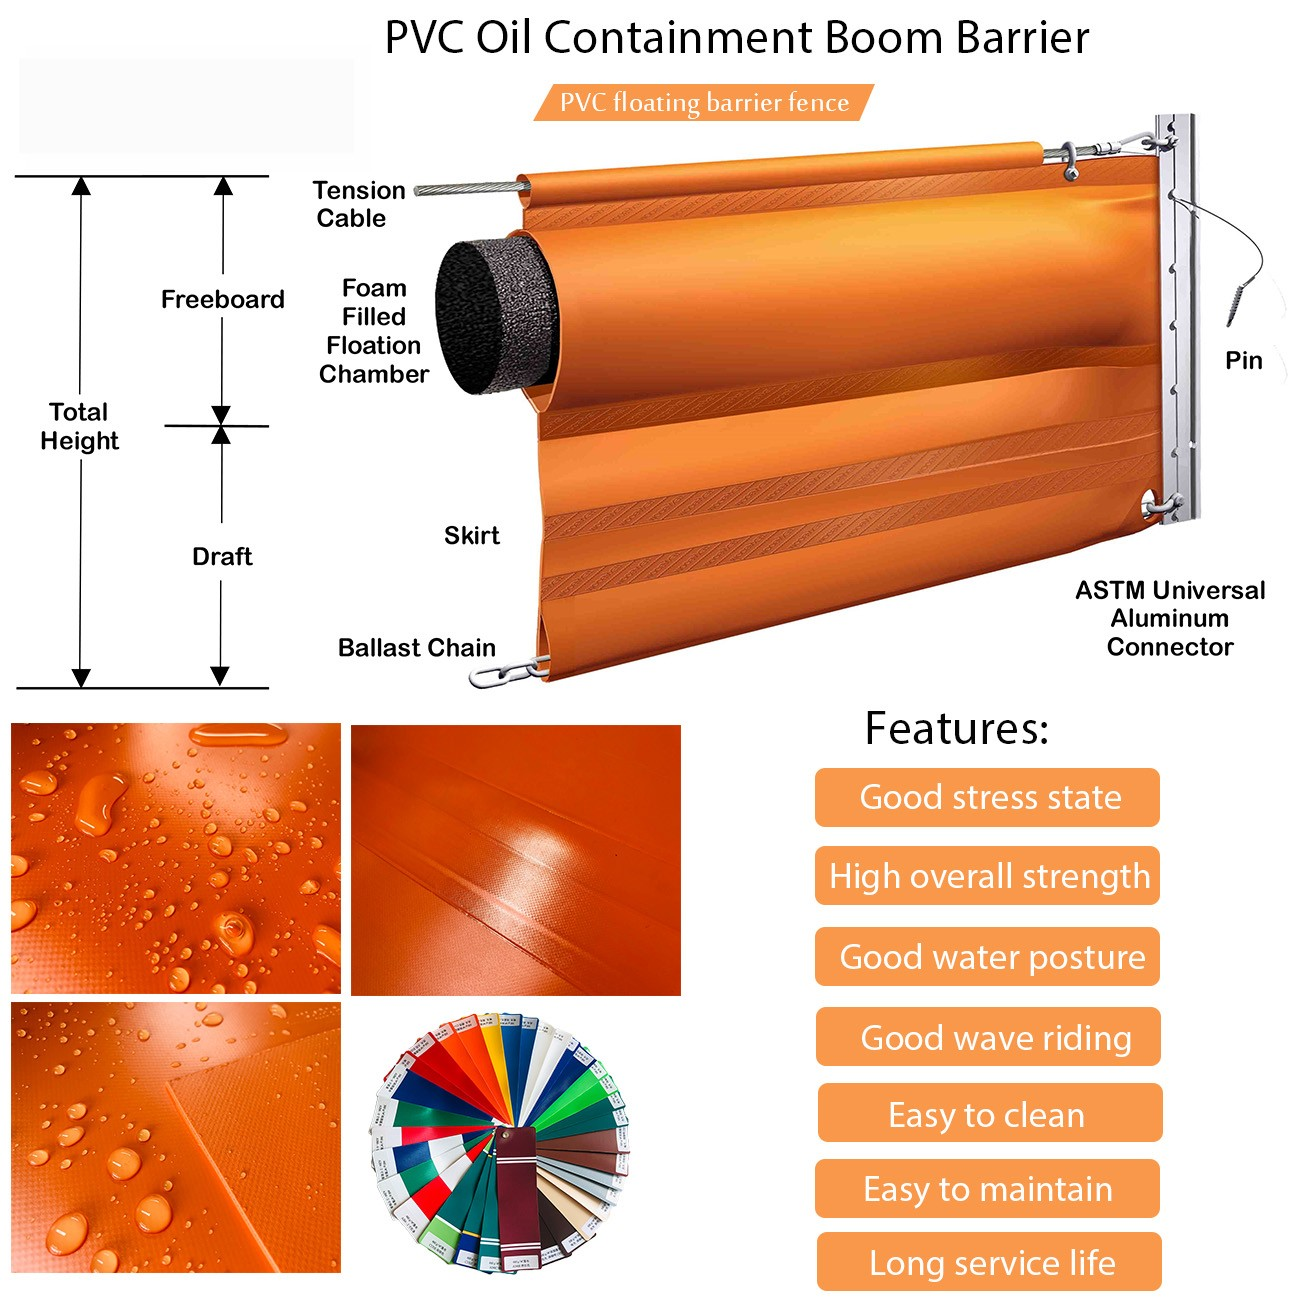 PVC oil containment boom barrier